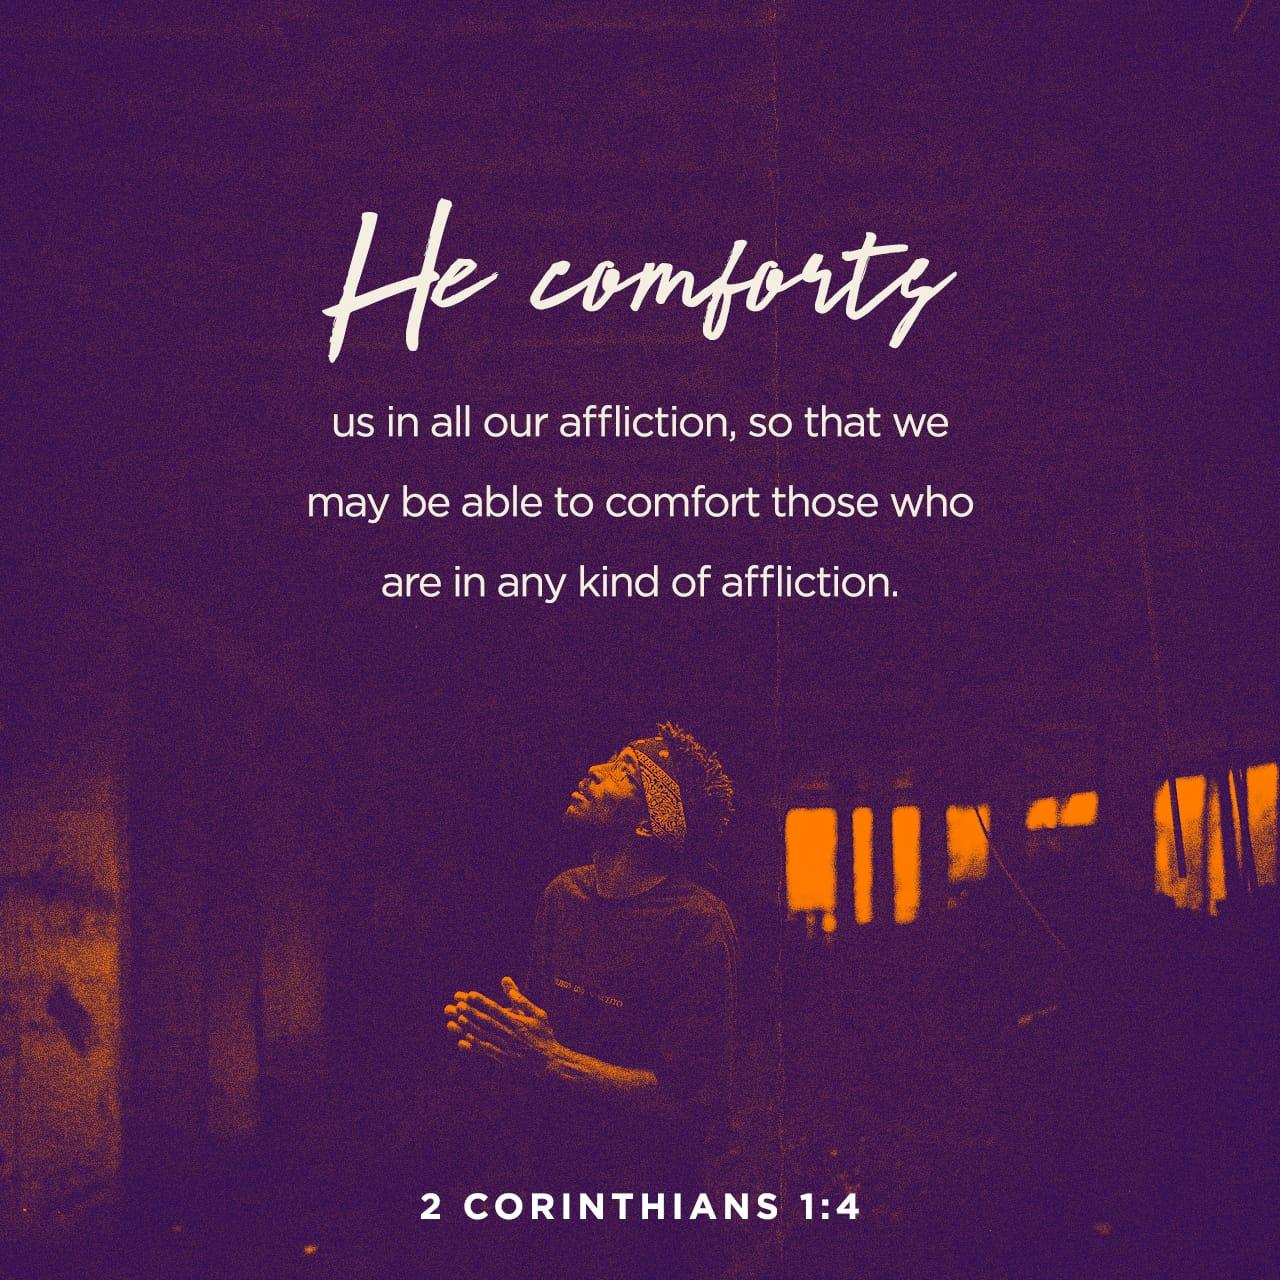 Bible Verse of the Day - day 154 - image 30007 (2 Corinthians 1:1-24)